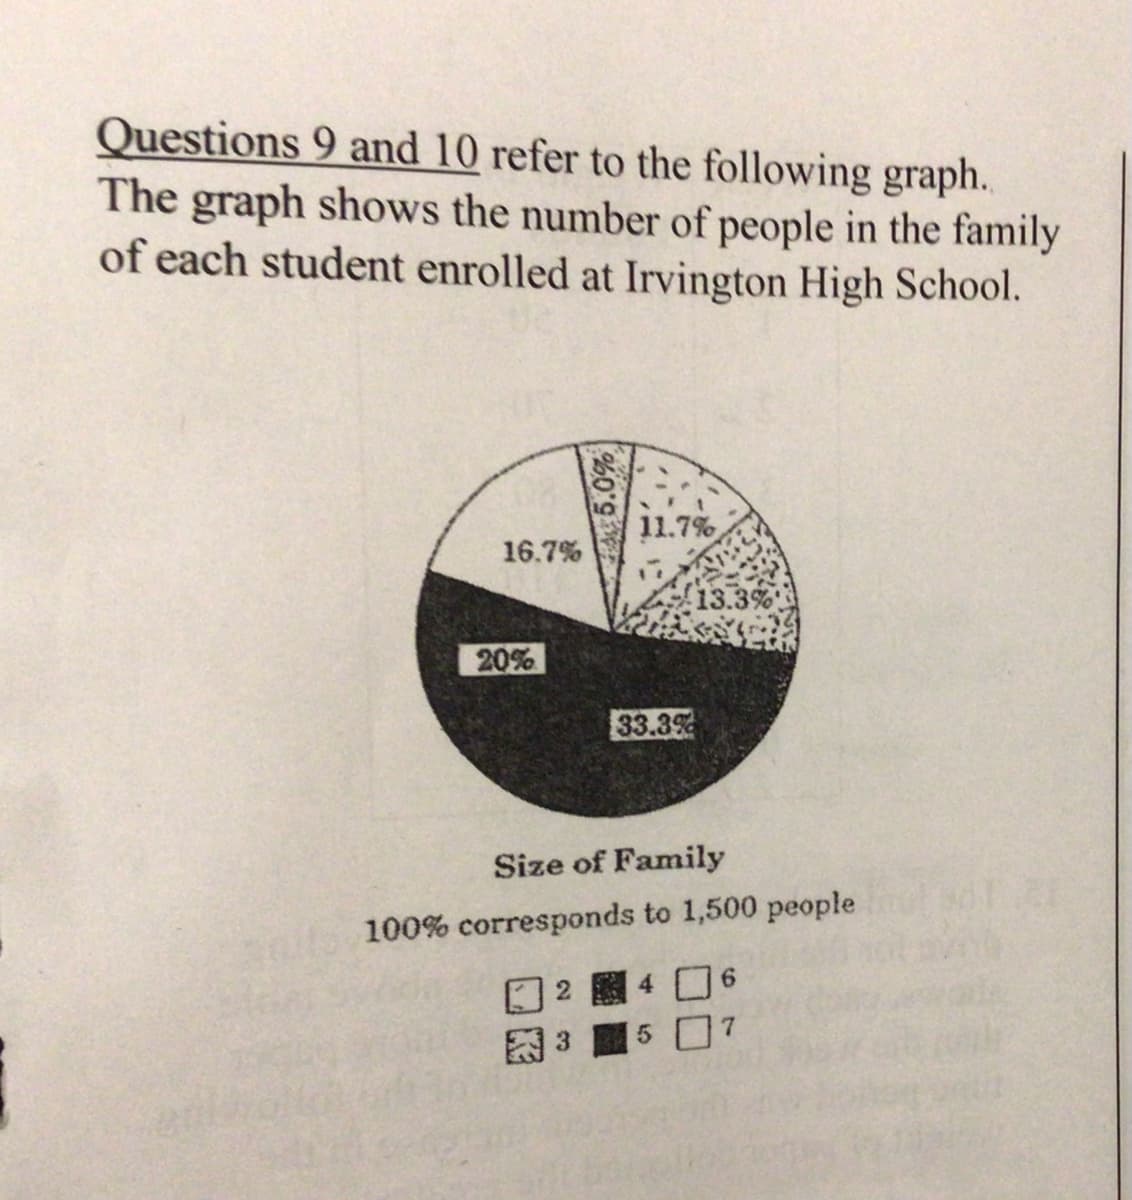 Questions 9 and 10 refer to the following graph.
The graph shows the number of people in the family
of each student enrolled at Irvington High School.
11.7%
16.7%
13.3%
20%
33.3%
Size of Family
100% corresponds to 1,500 people
6.
2 4
園3
5 0
